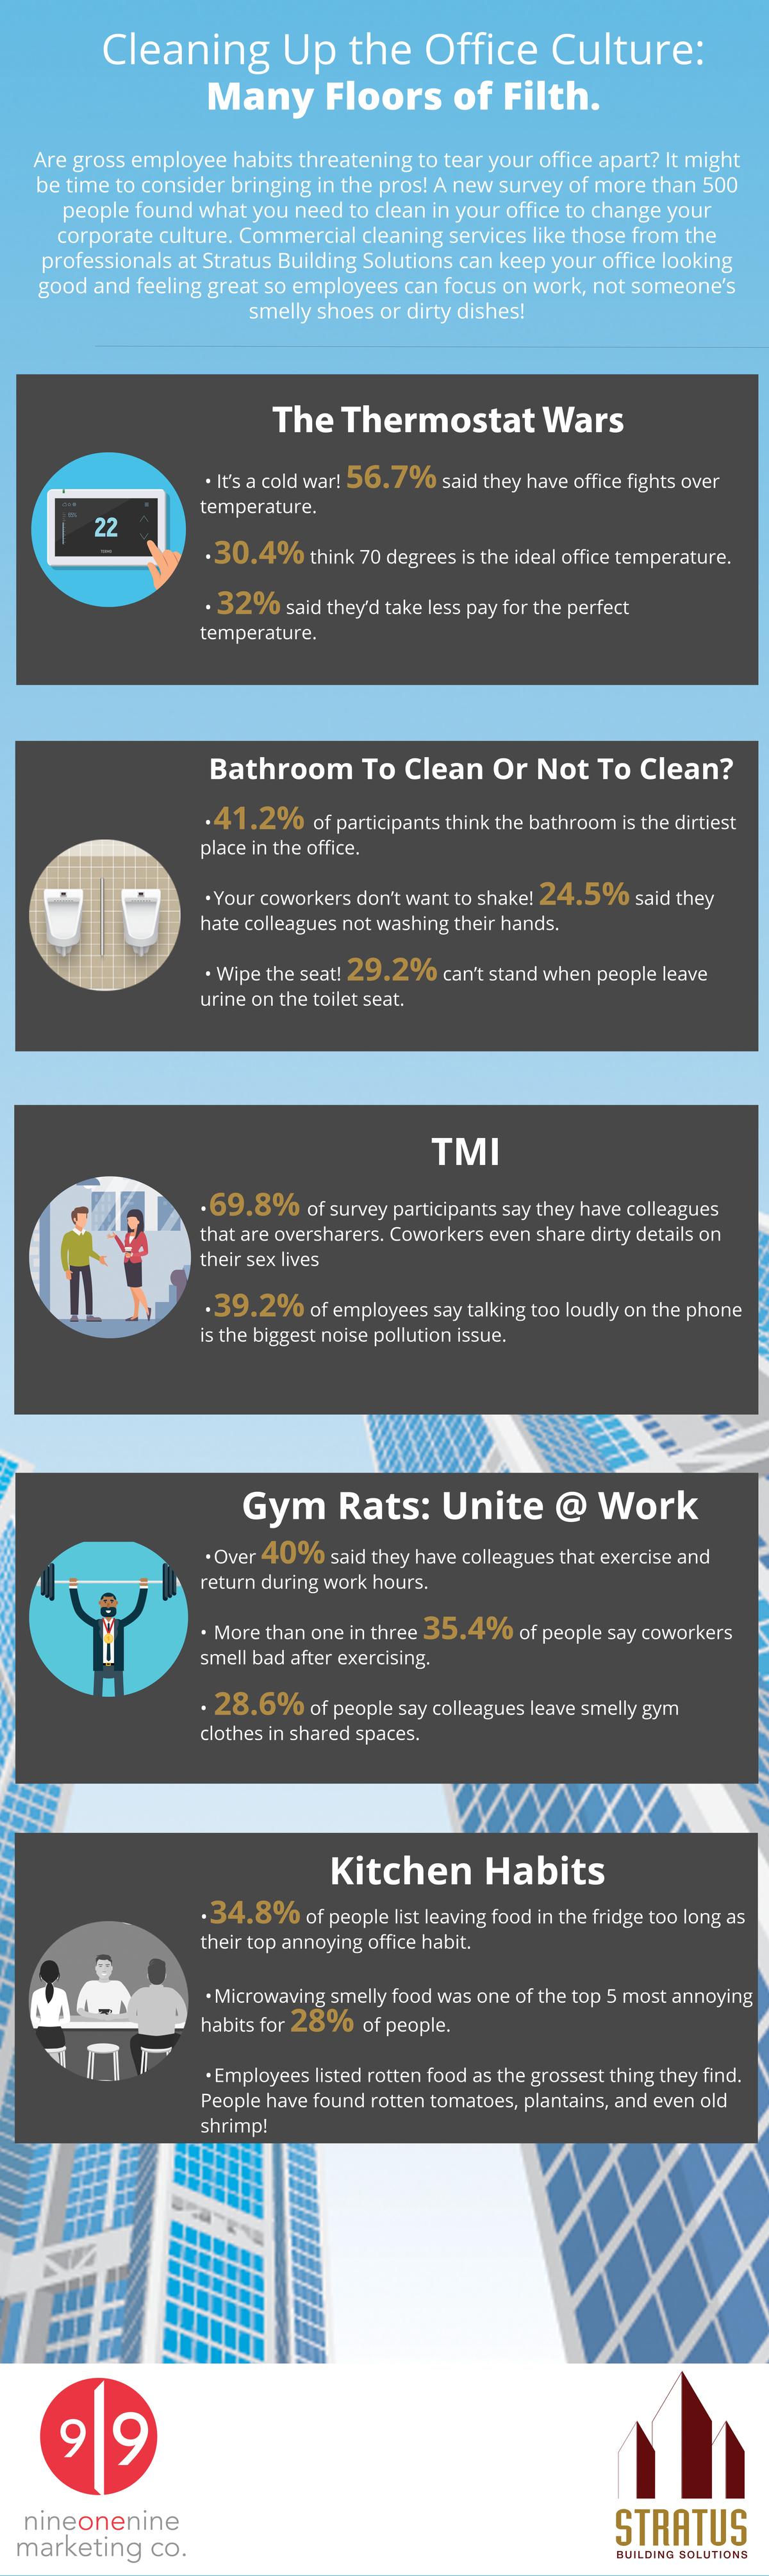 Office Cleaning Survey, Office Cleaning Infographic, Office Cleaning Services 